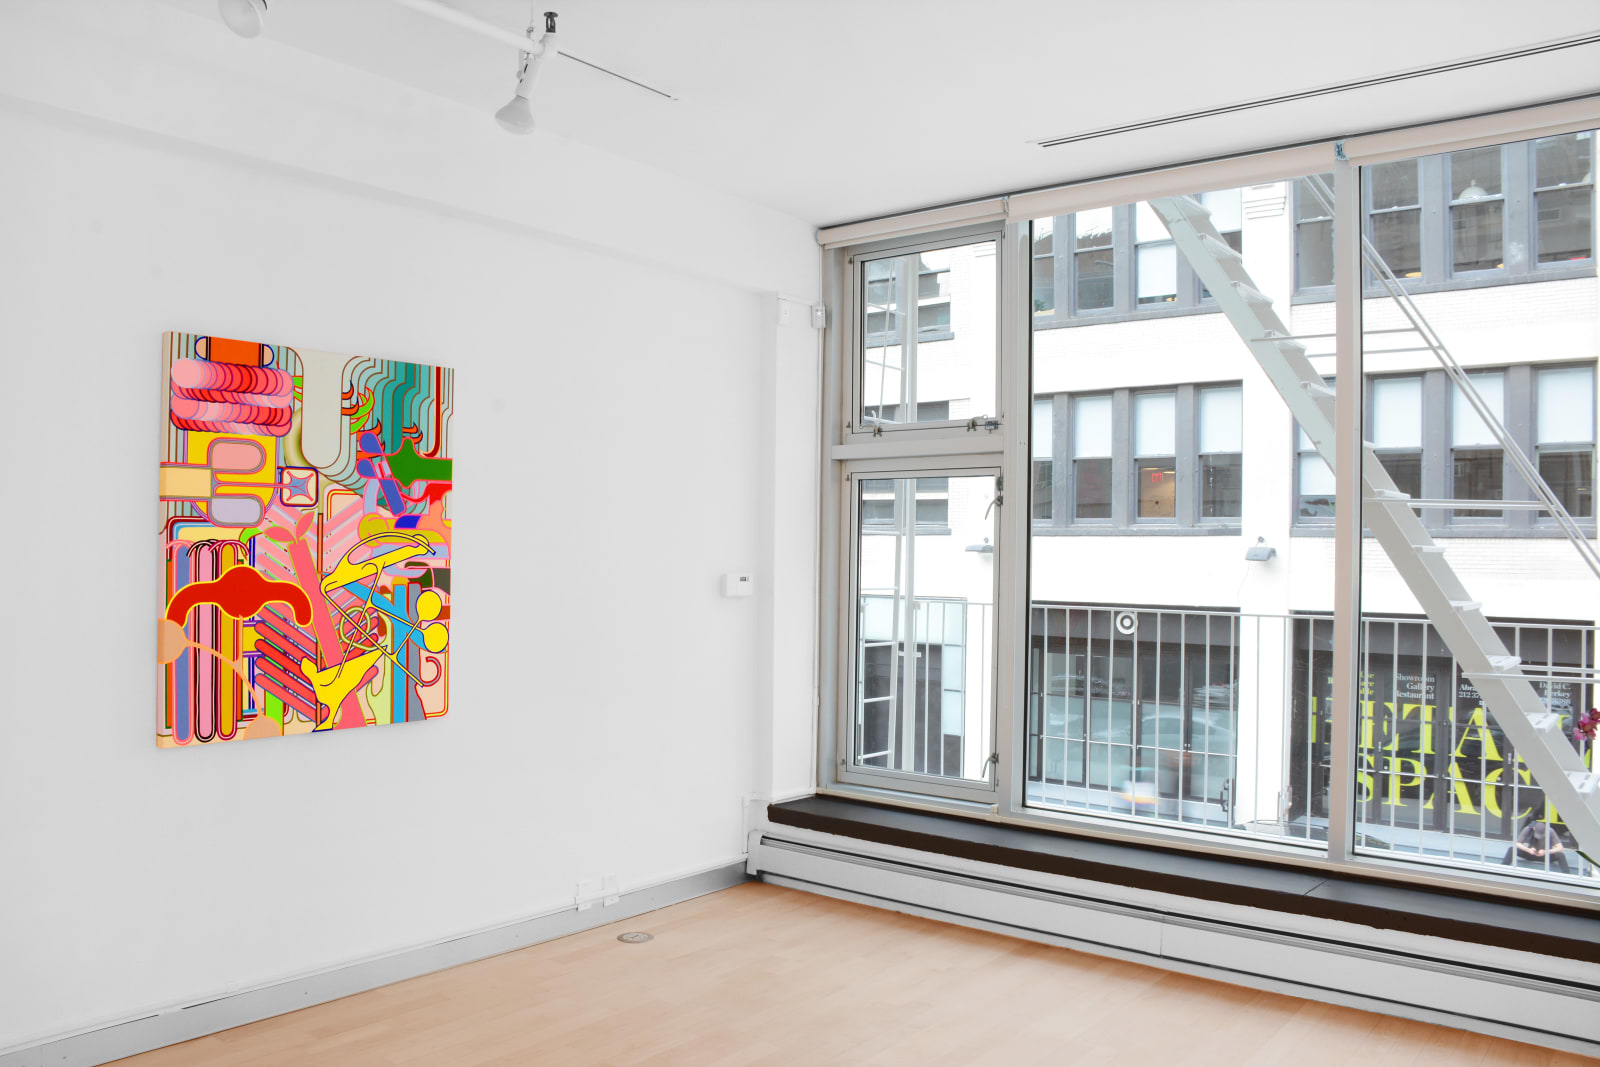 Installation view: Breaking the Frame